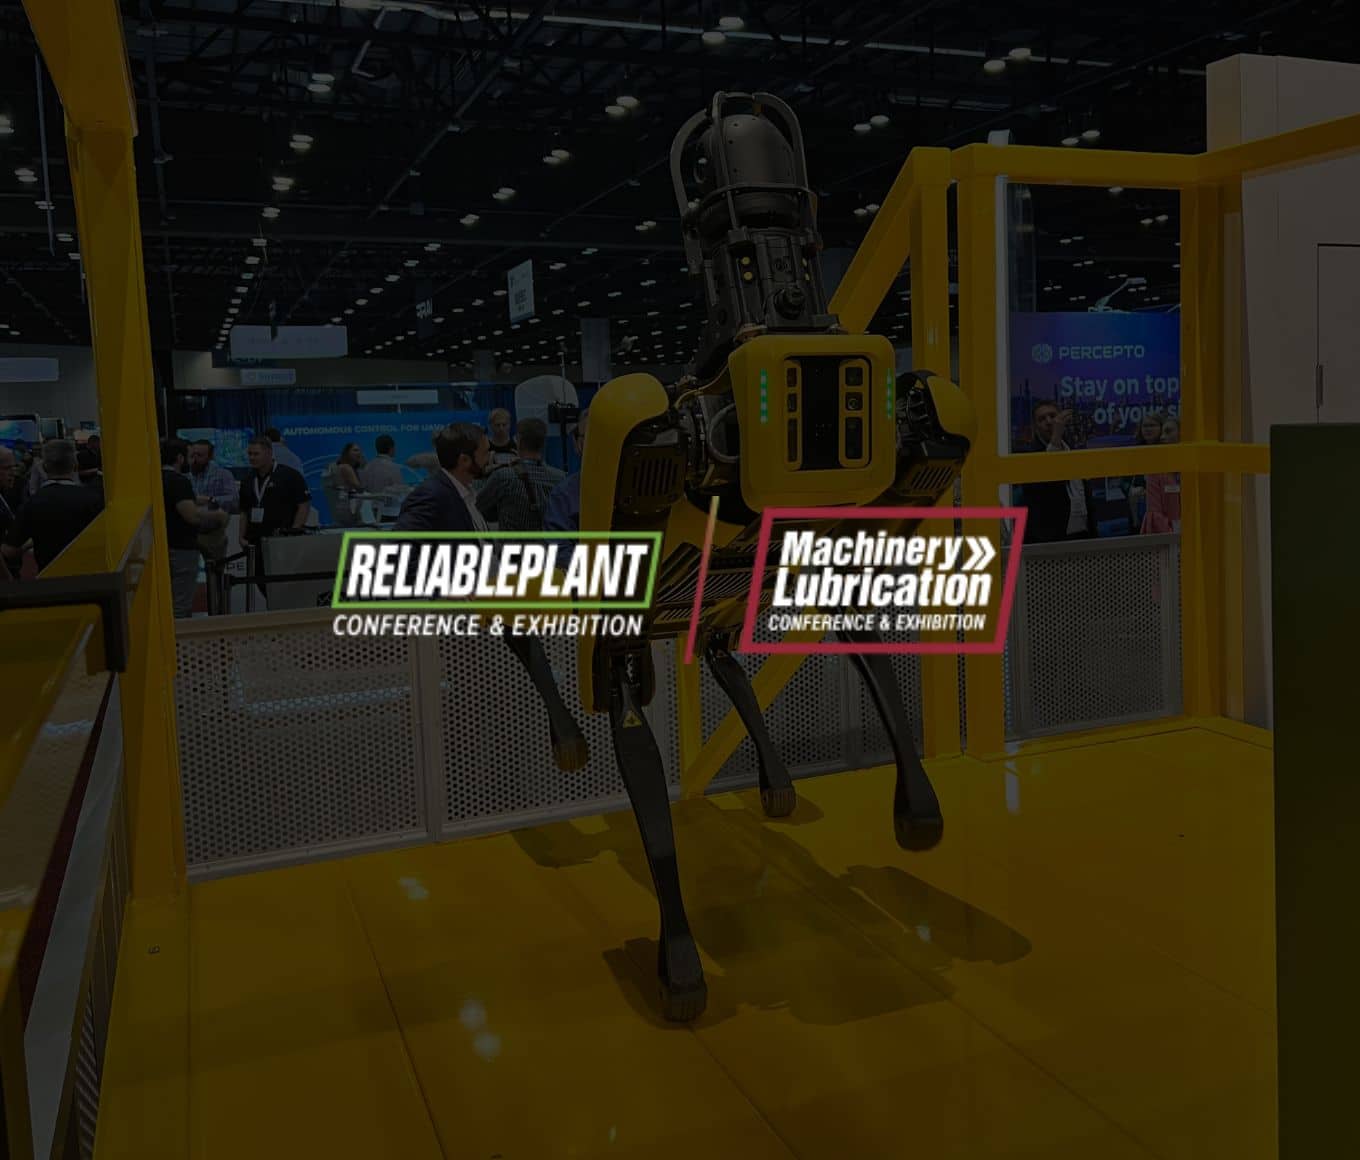 Spot in a trade show booth with Reliable Plant and Machine Lubrication Conference logos overlaid